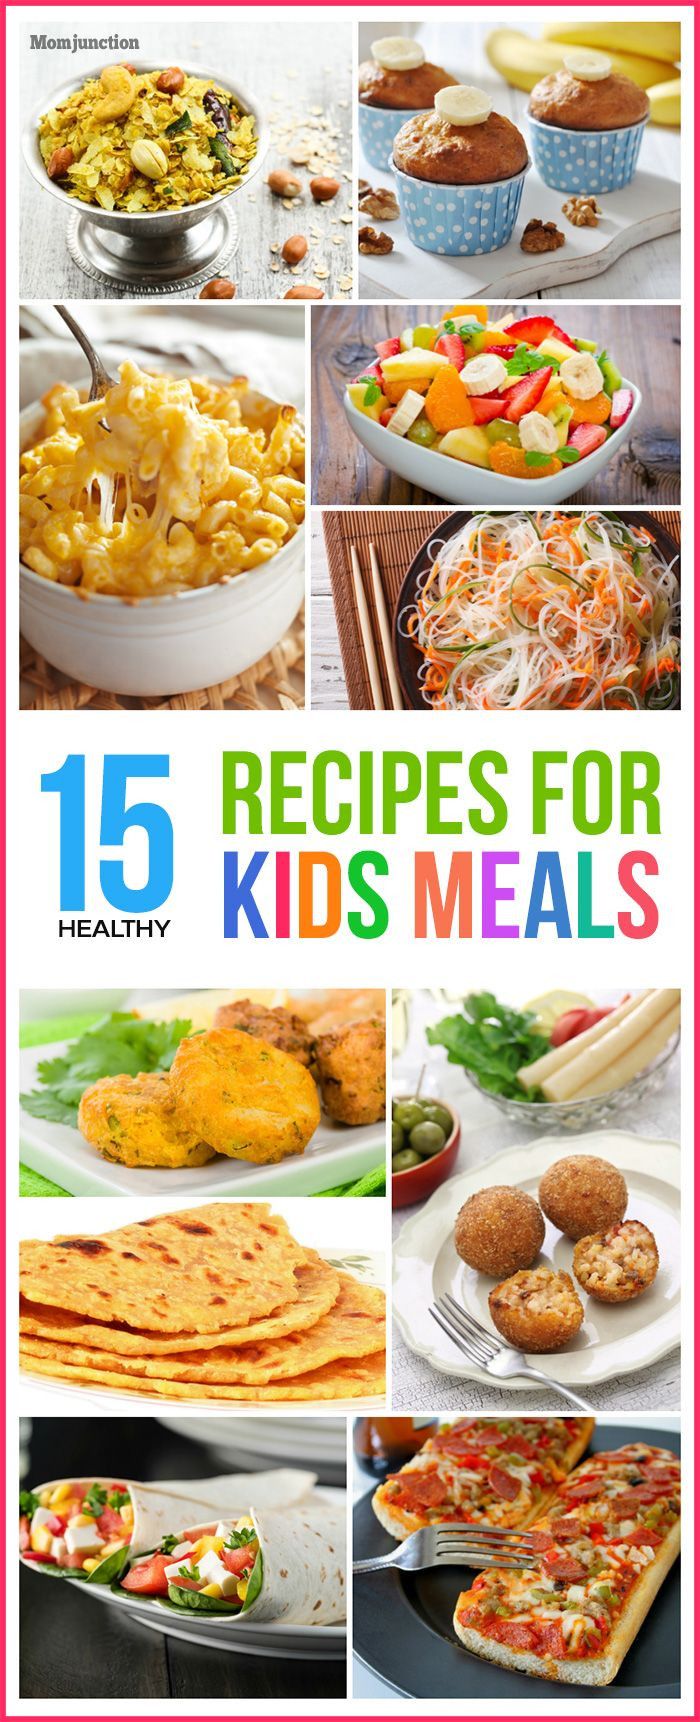 Great Recipes For Kids
 Top 15 Healthy Recipes For Kids Meals